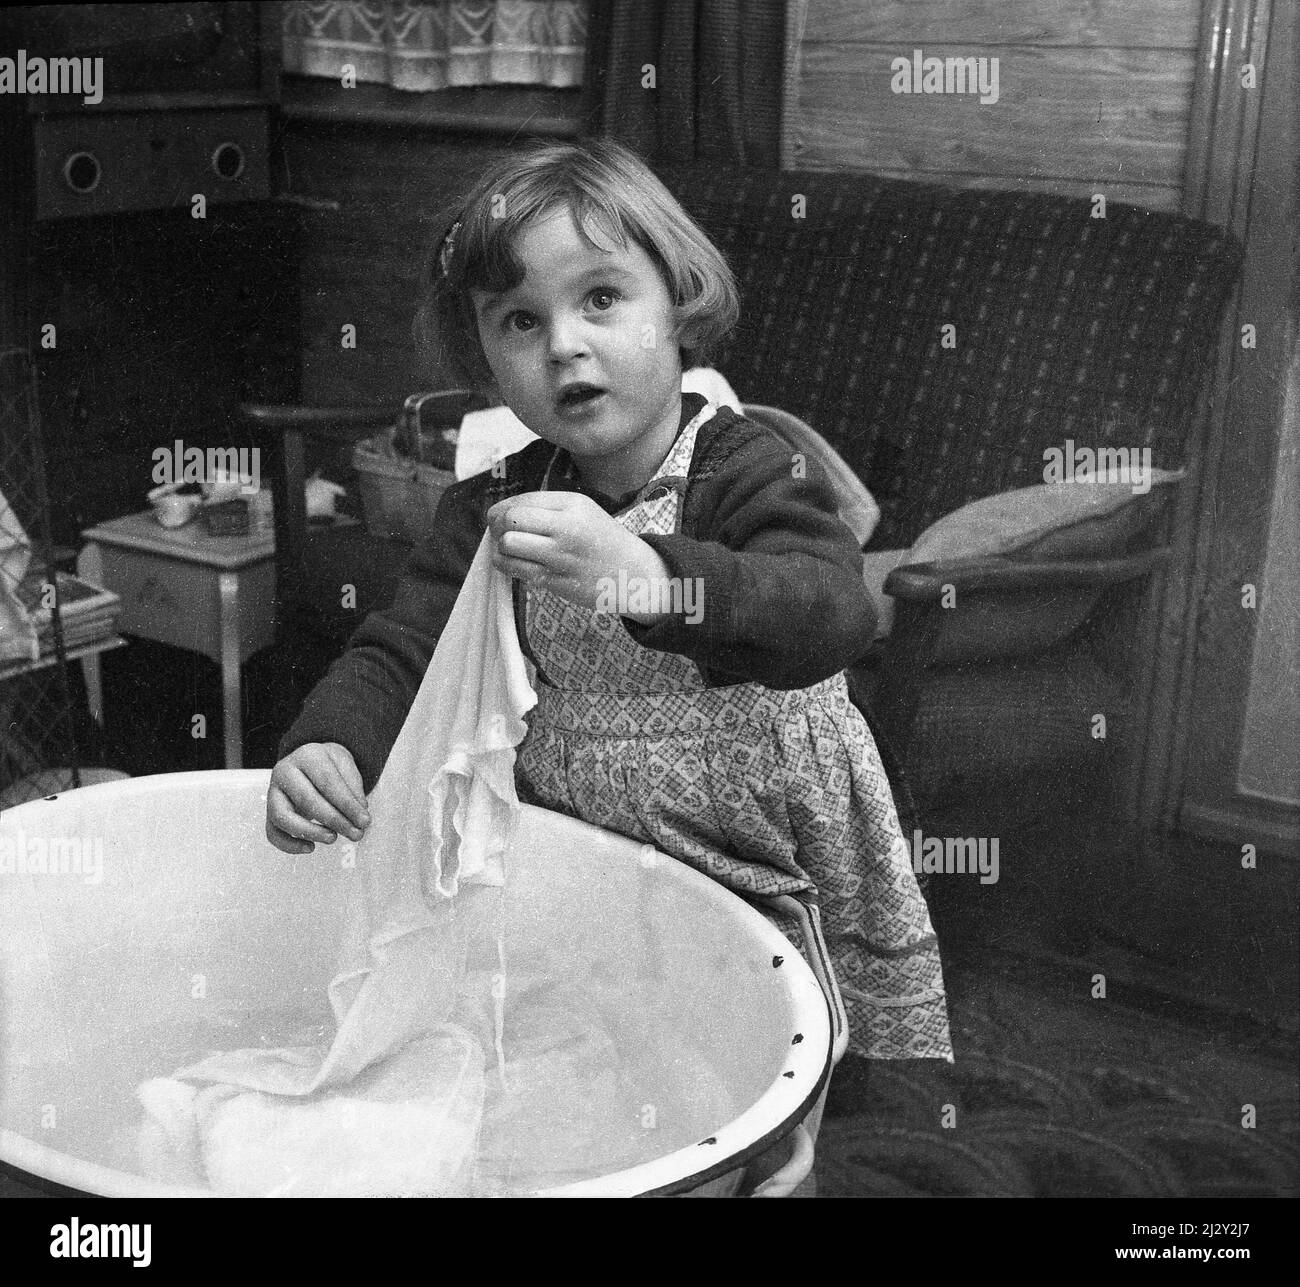 1961, hisotrical, standing in a front room, little girl holding up an item of clothing that has been washed in an enamel basin or bowl, Stockport, Manchester, England, UK. Stock Photo